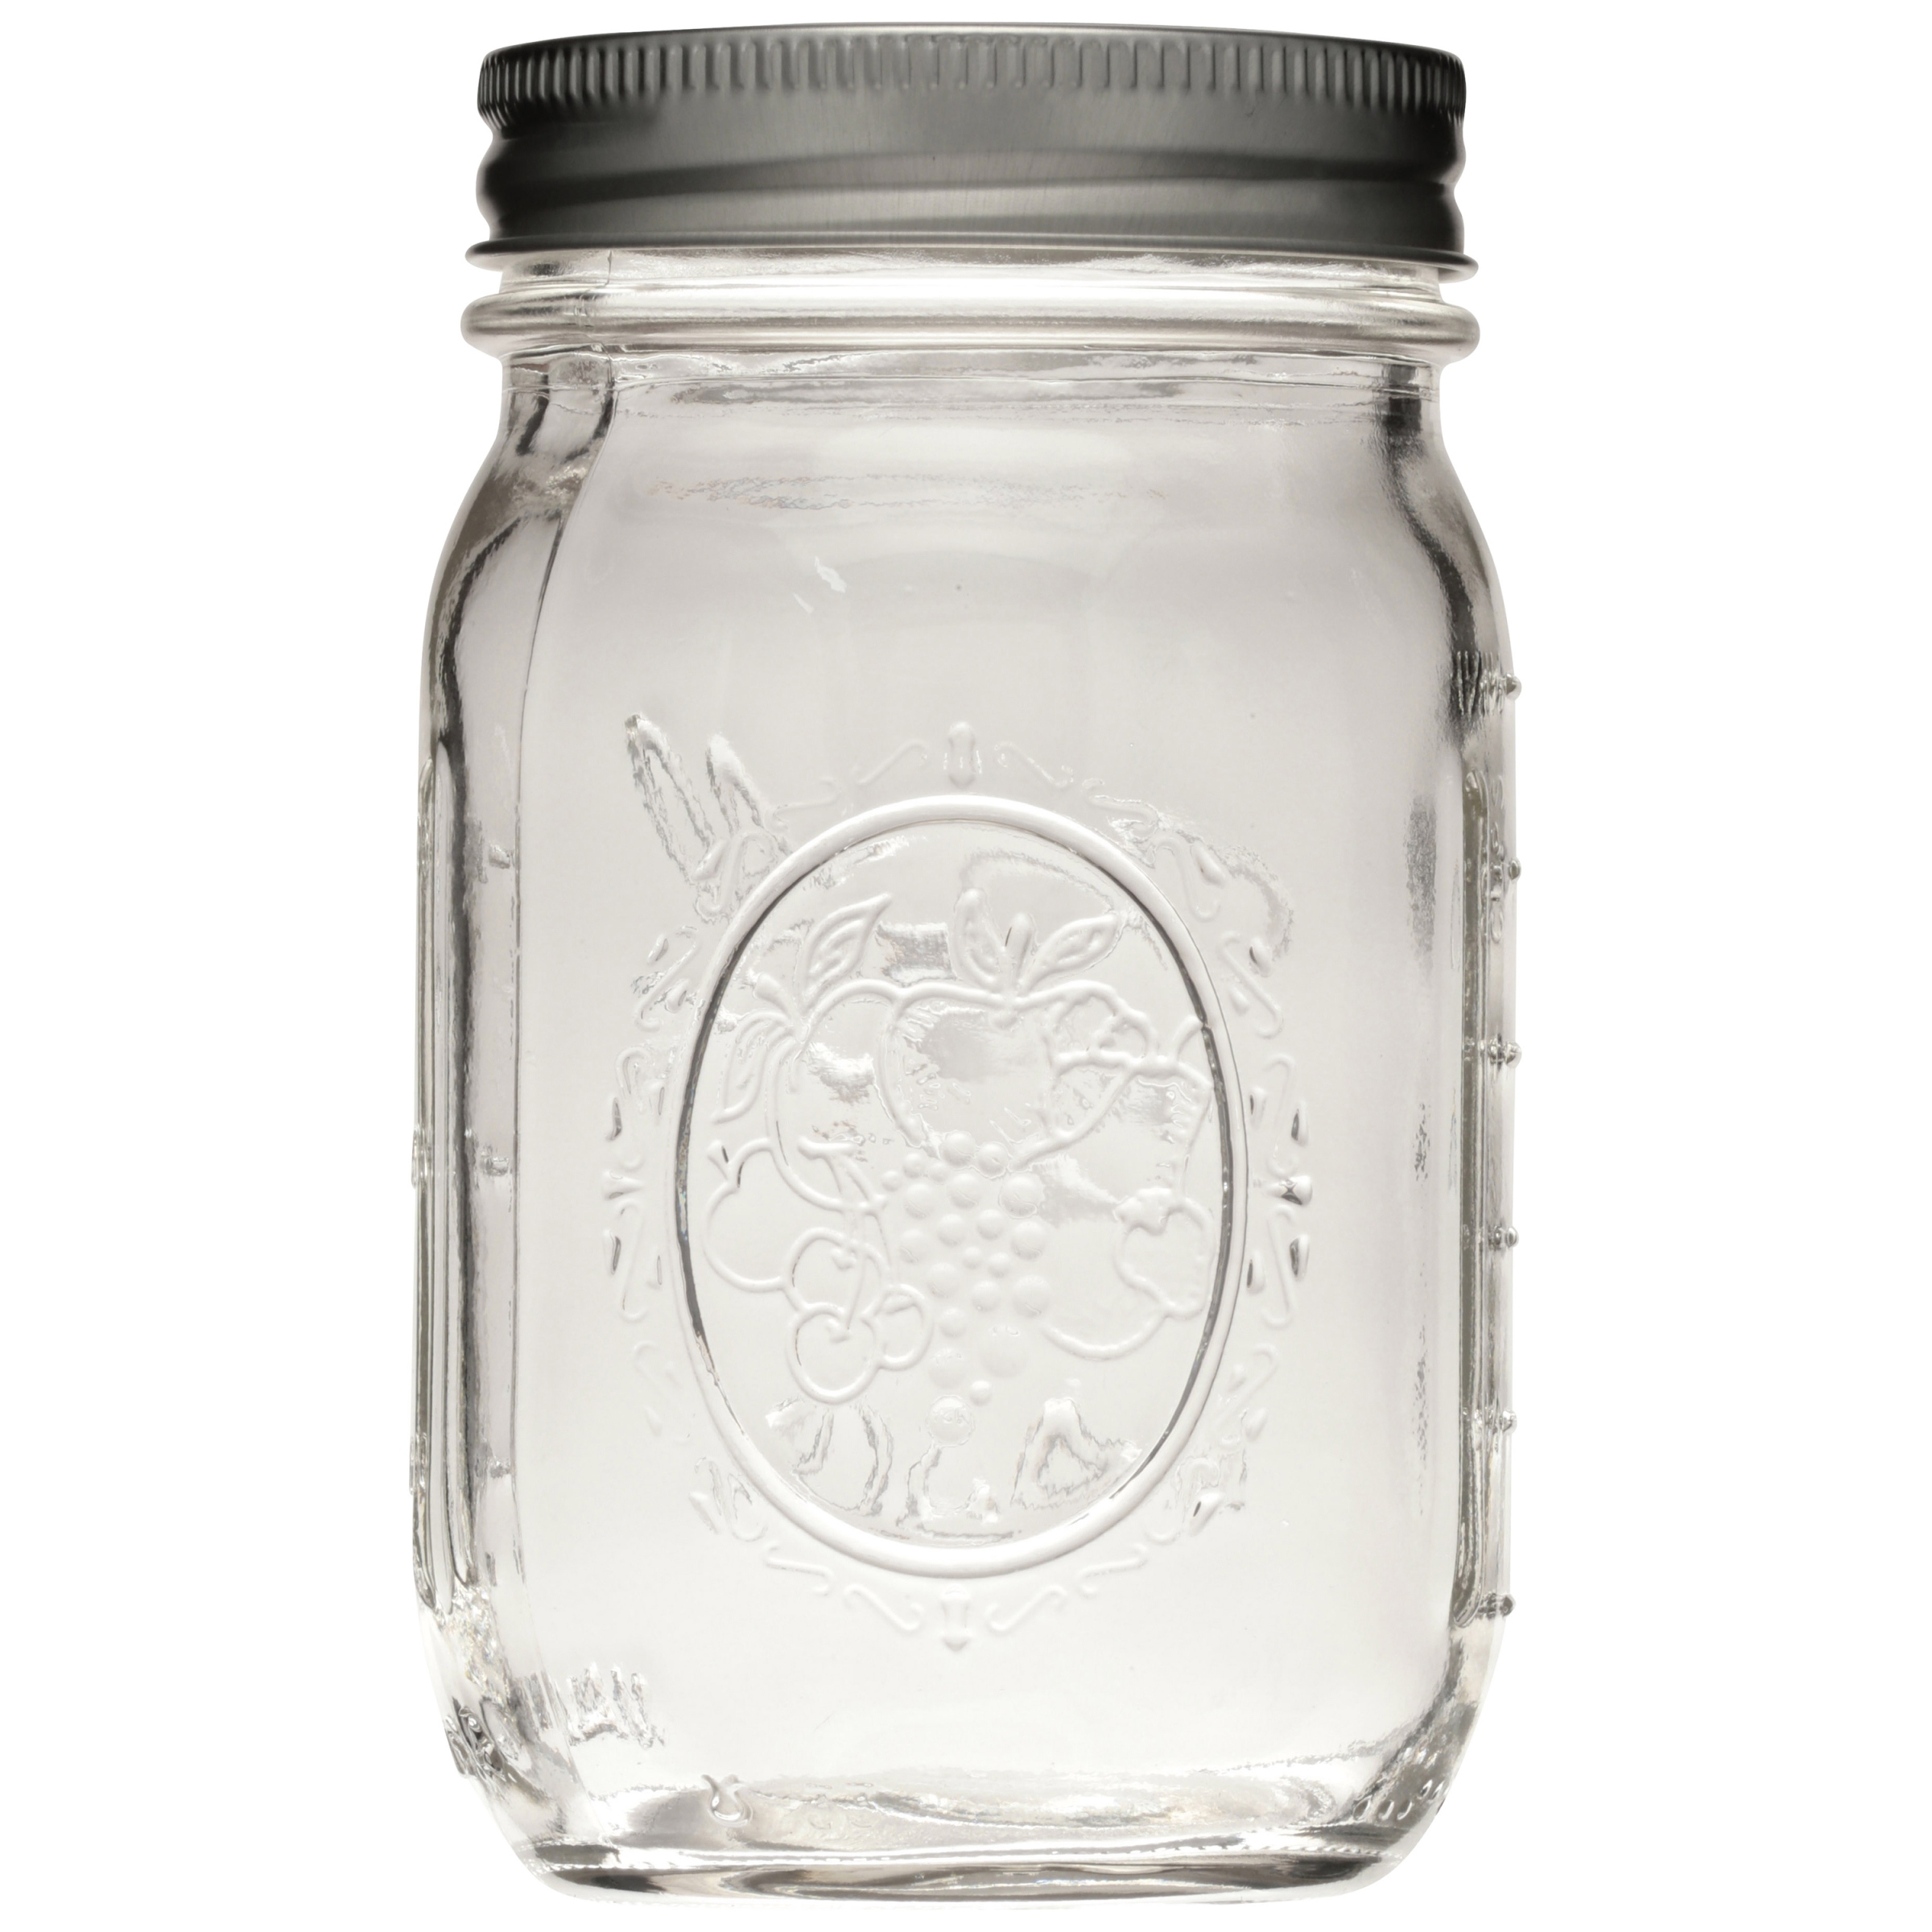 Ball Glass Mason Jars with Lids & Bands, Regular Mouth, 16 oz, 12 Pack - image 4 of 4